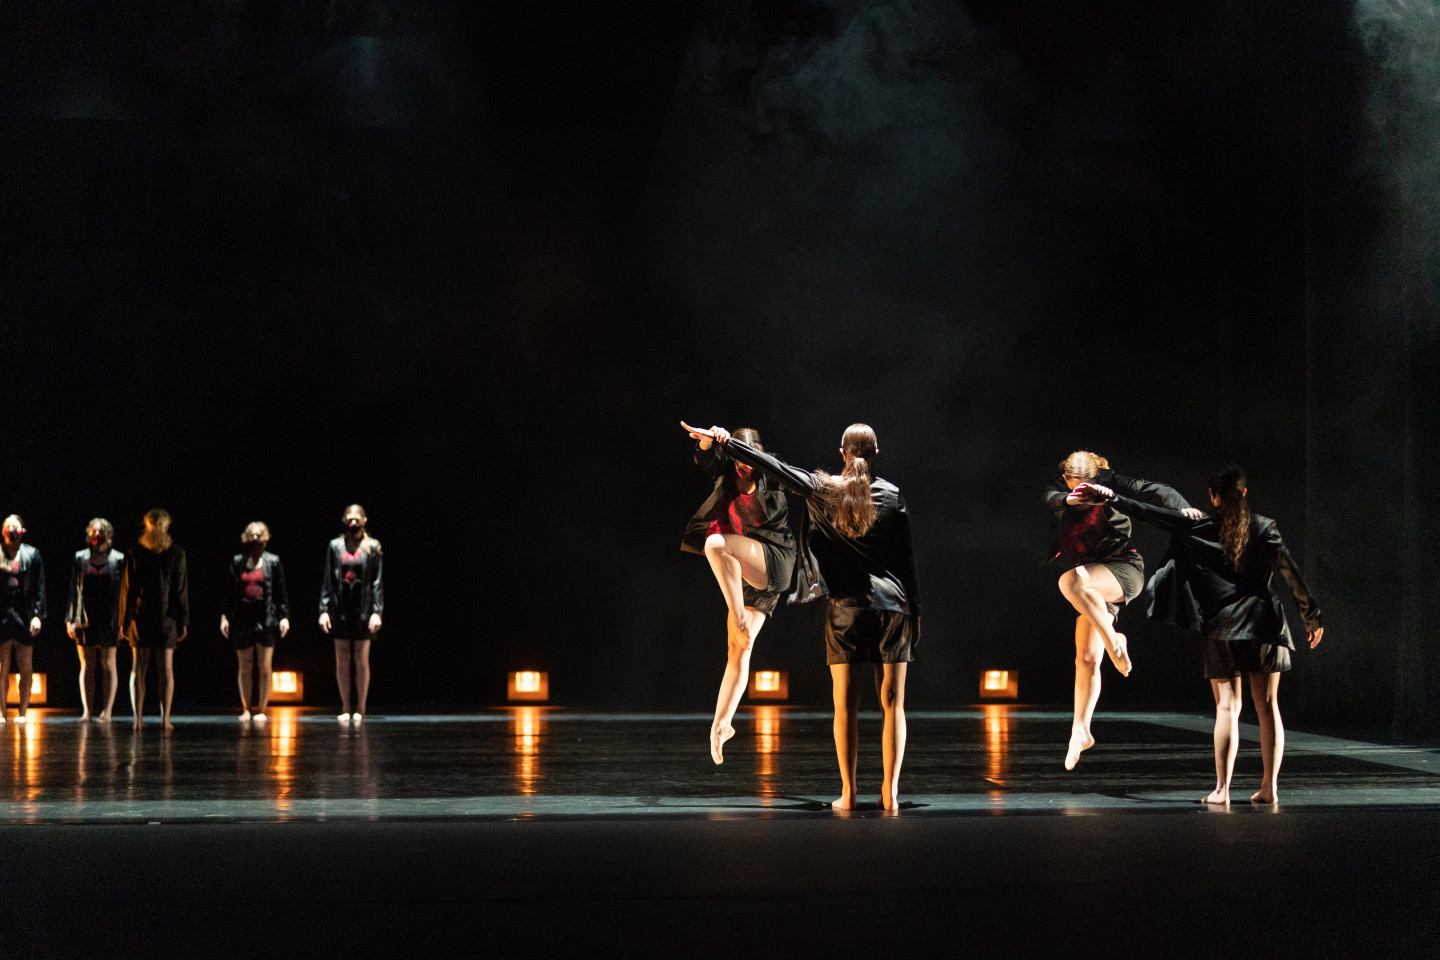 Dancers perform on a stage.